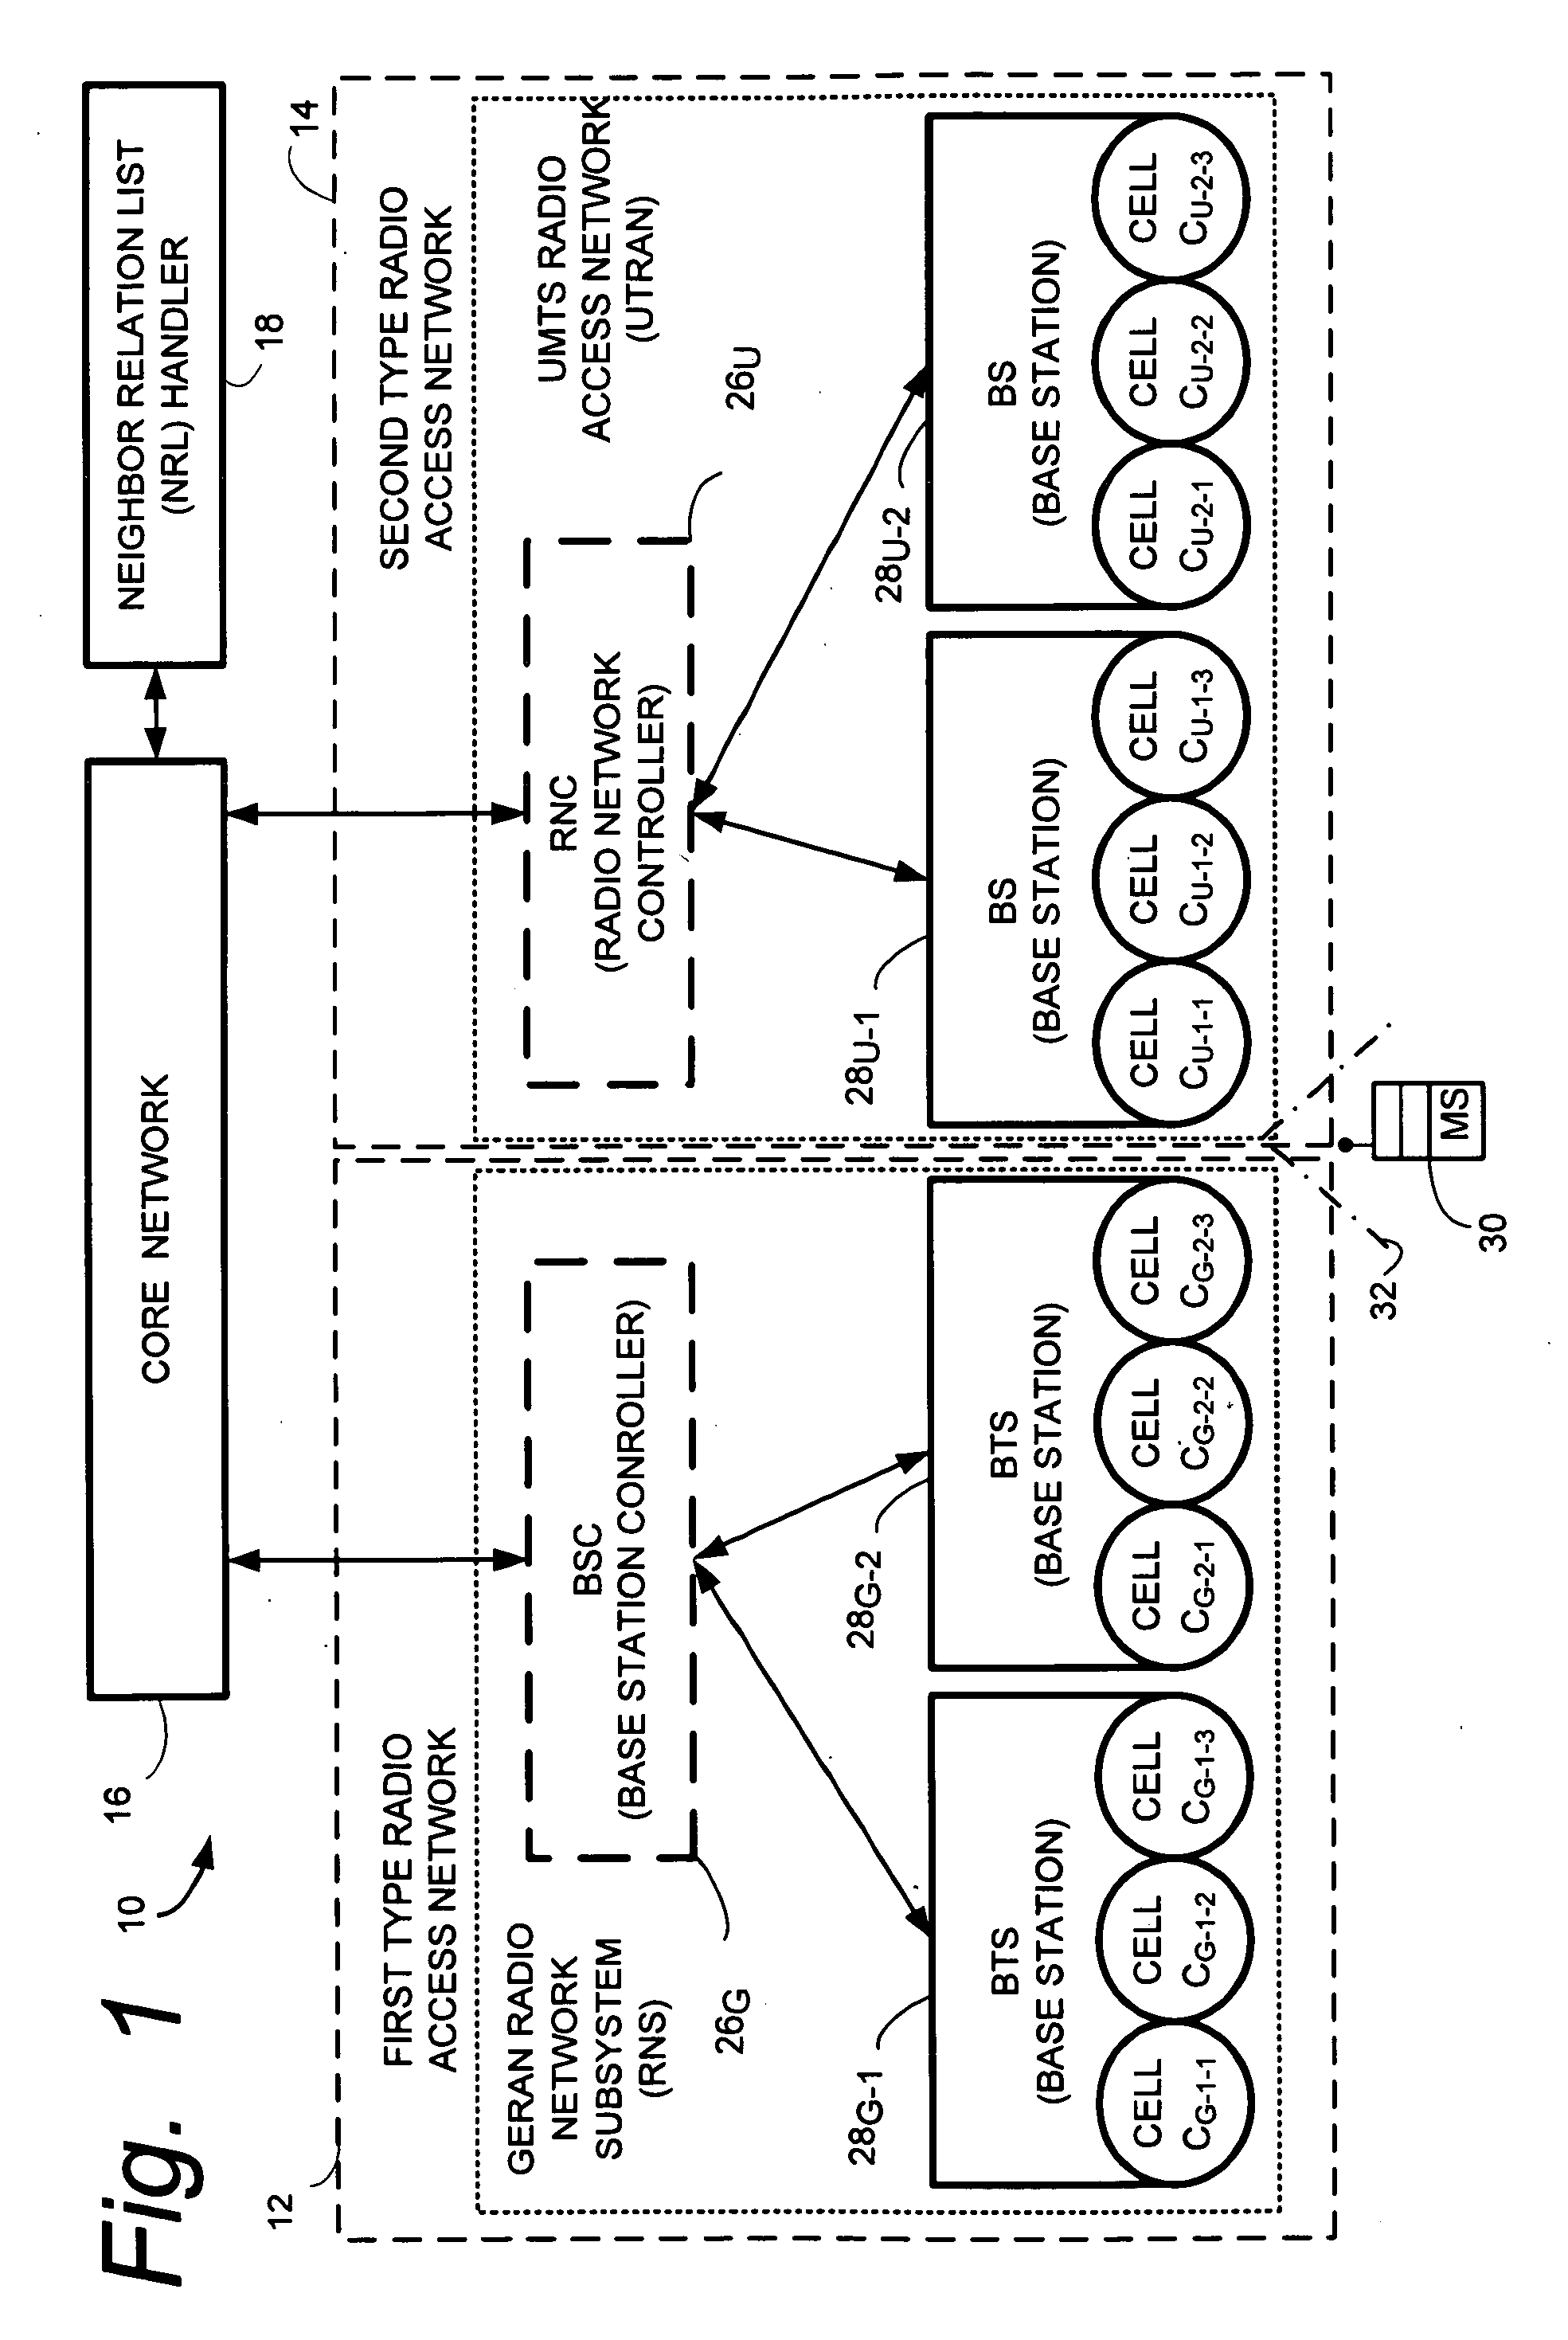 Inter-rat/ frequency automatic neighbor relation list management